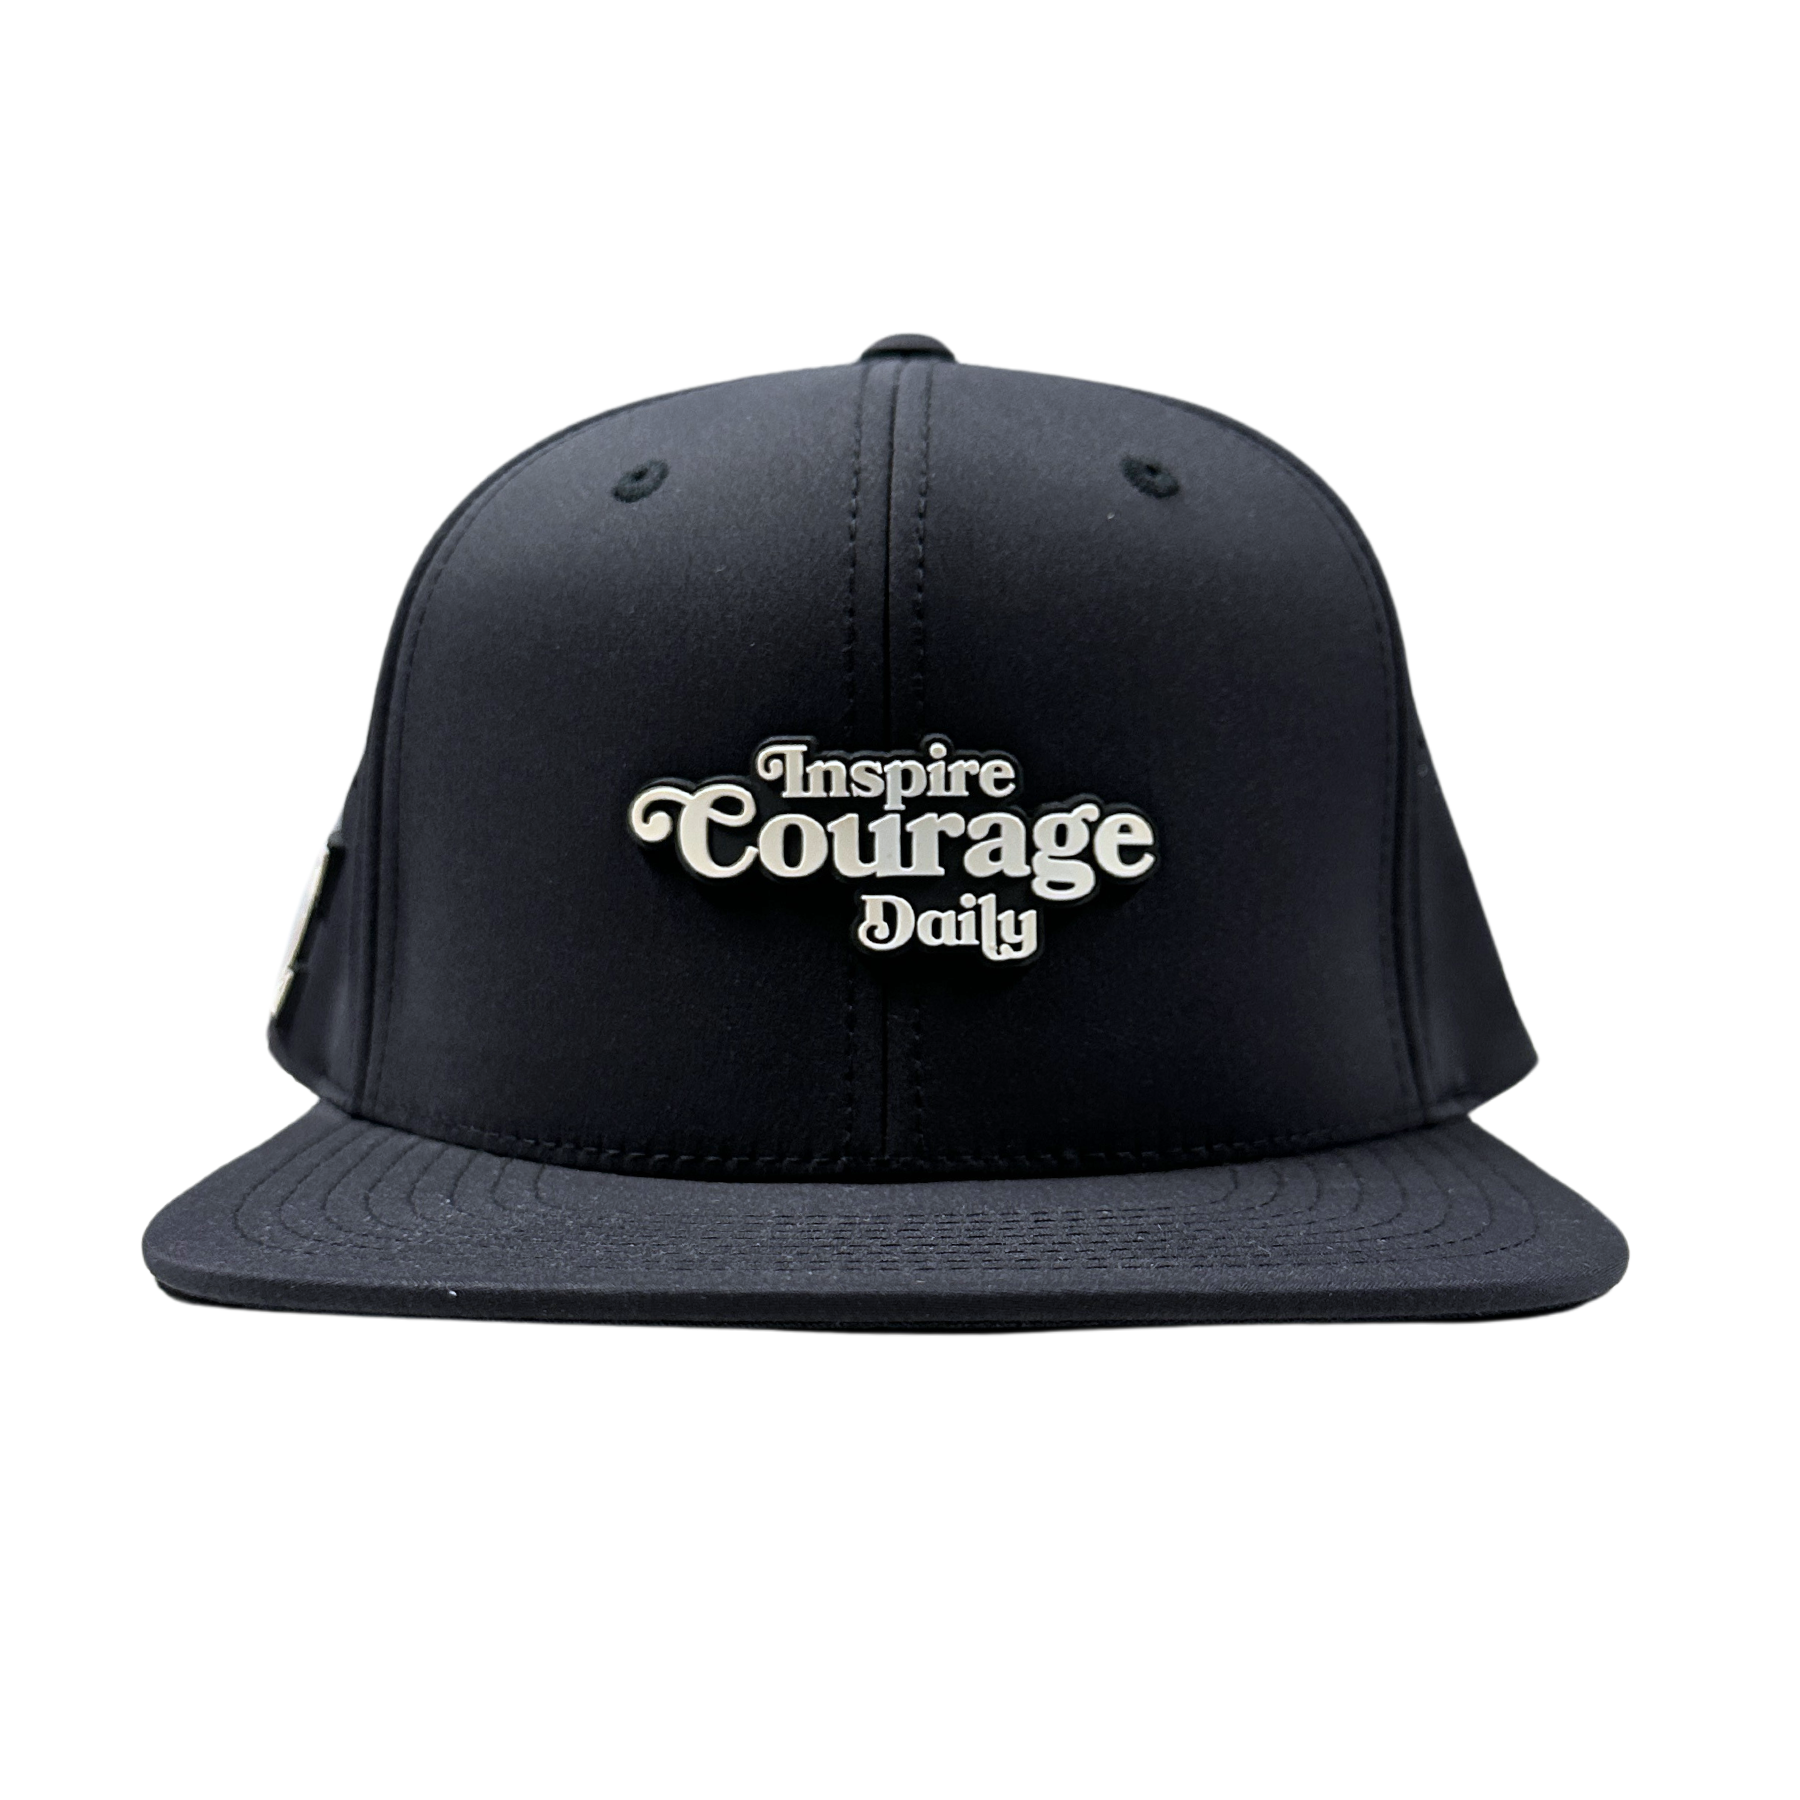 Inspire Courage Daily Black Snapback Hat